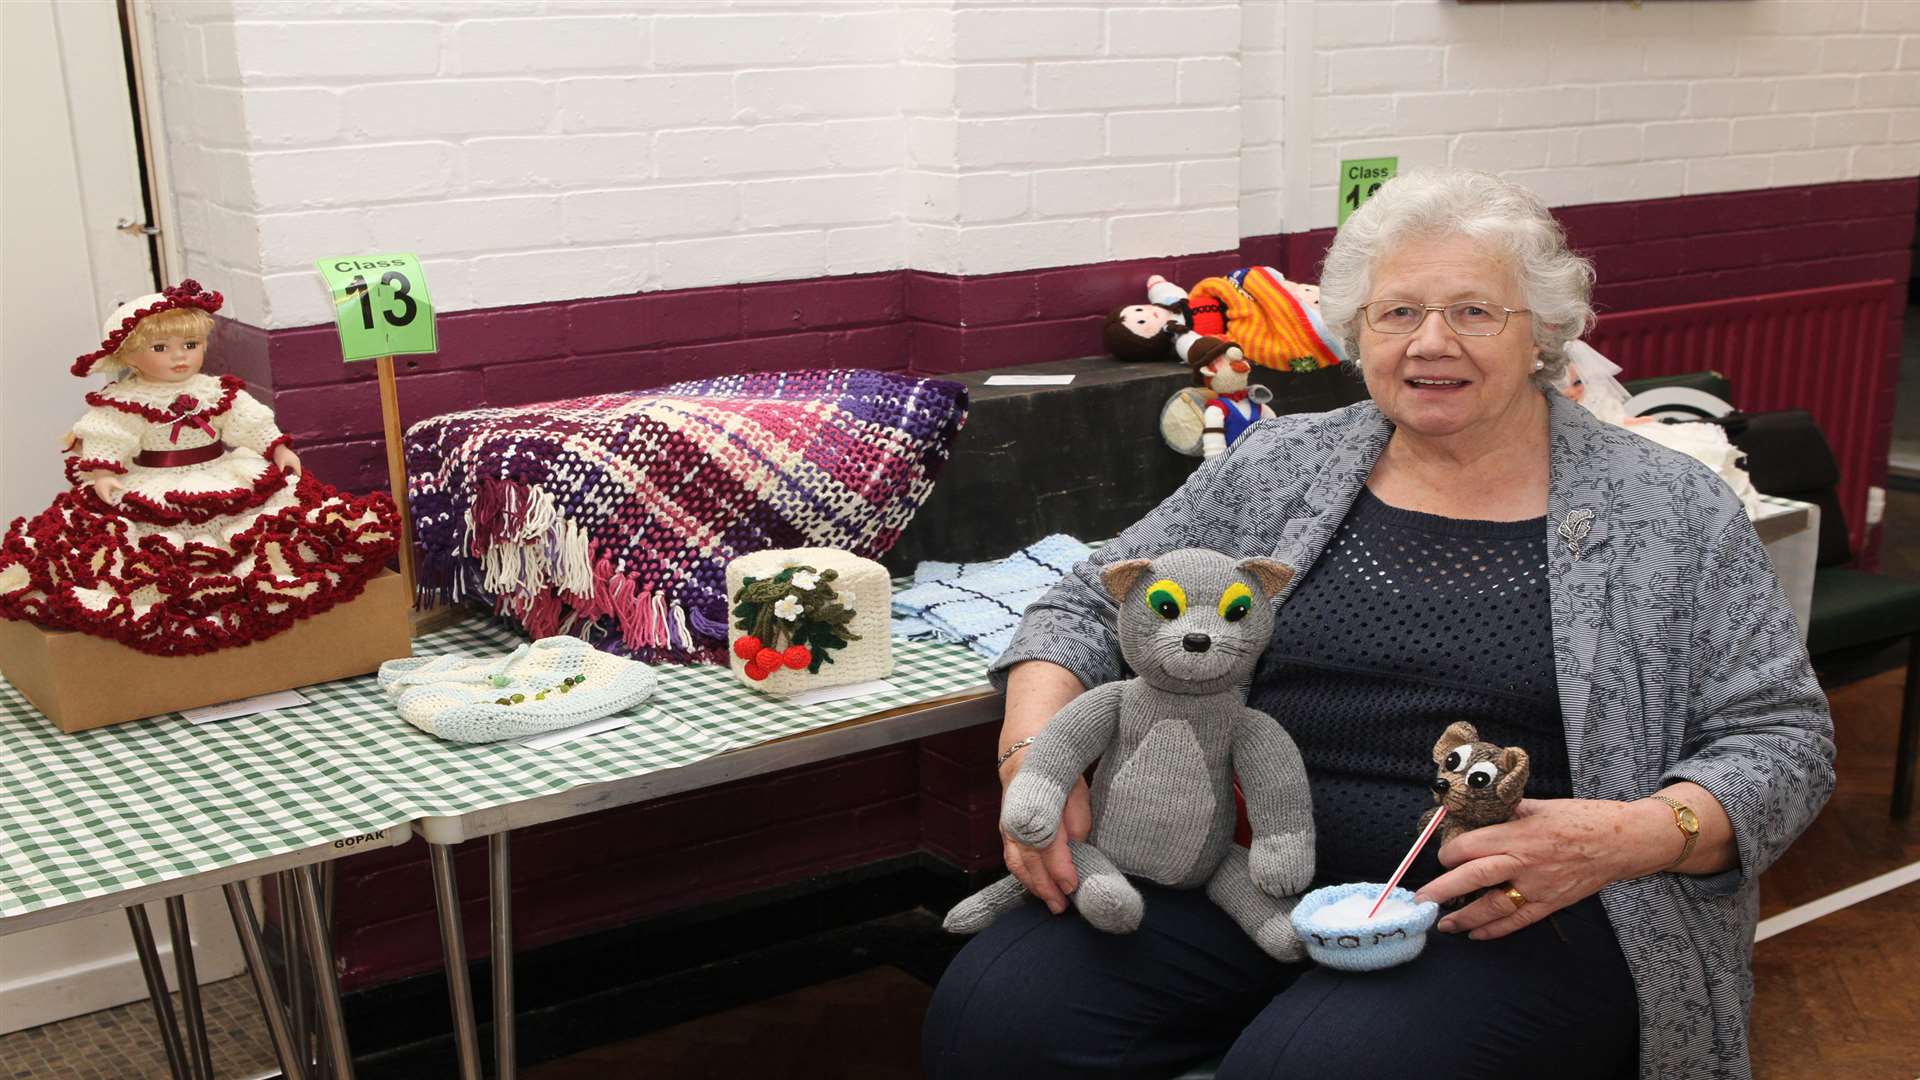 Joyce Dutton with her "Tom and Jerry" knitting entry at the Eastchurch Gardening Society Spring Show